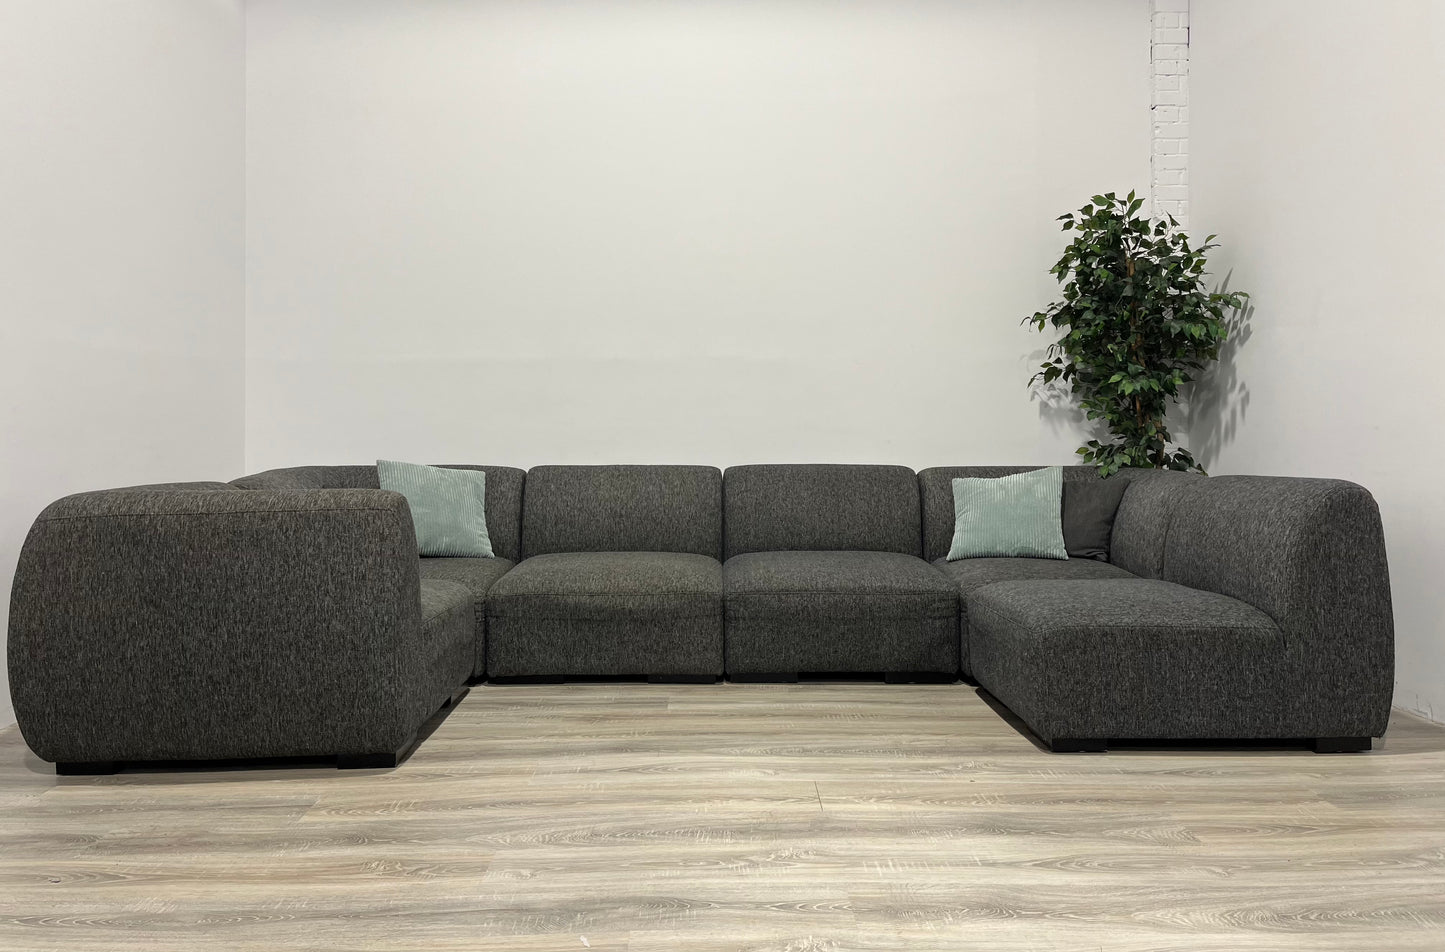 6 Piece Modular Mobilia Sectional Couch